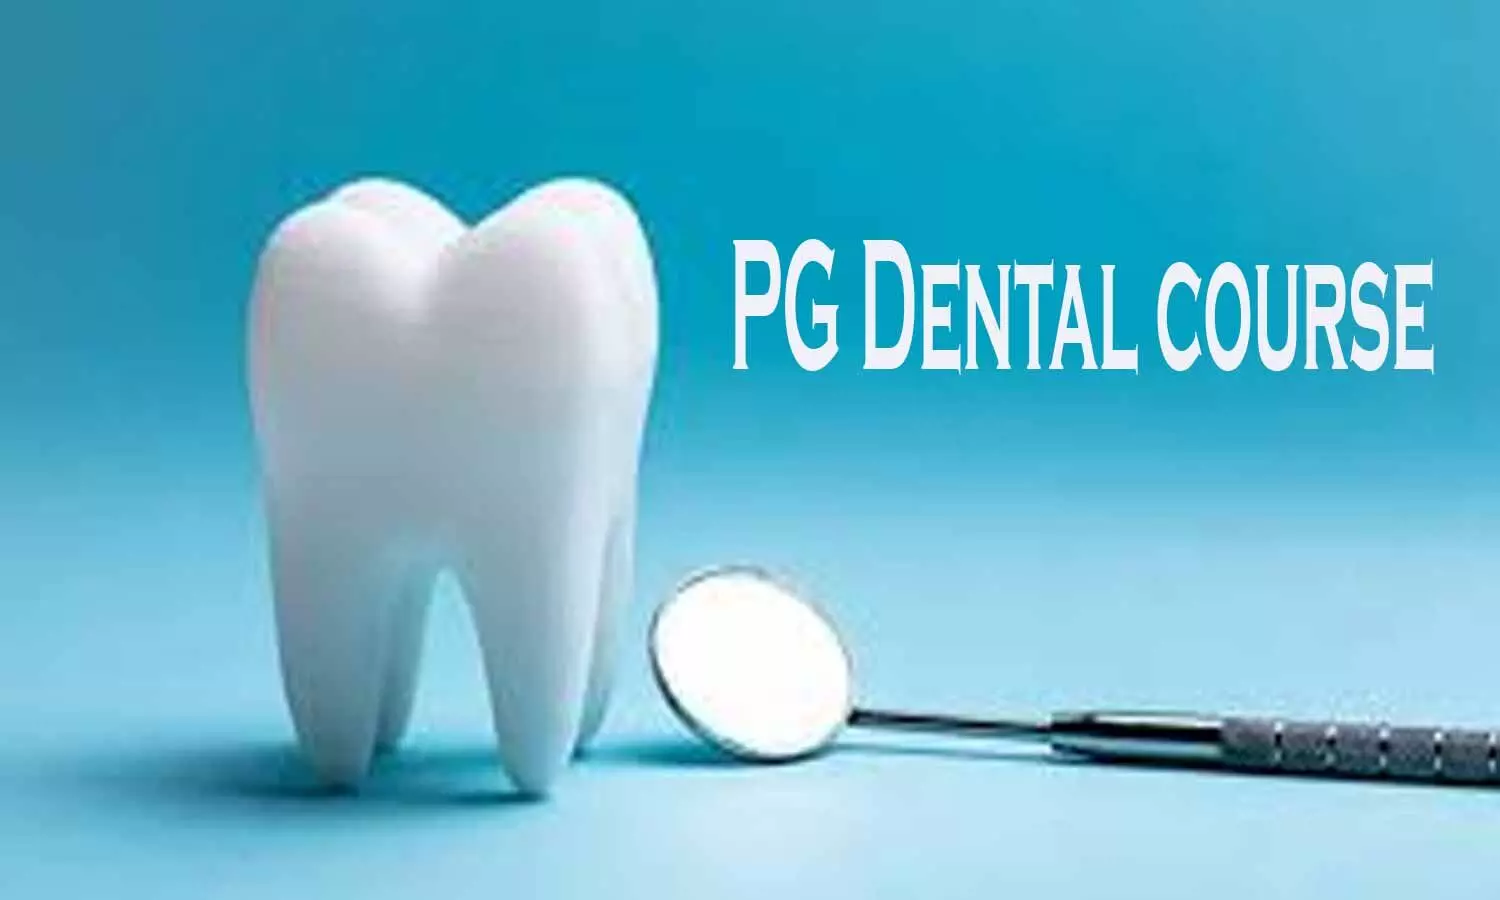 CENTAC invites applications from NRI candidates for Prosthodontics, Crown & Bridge course